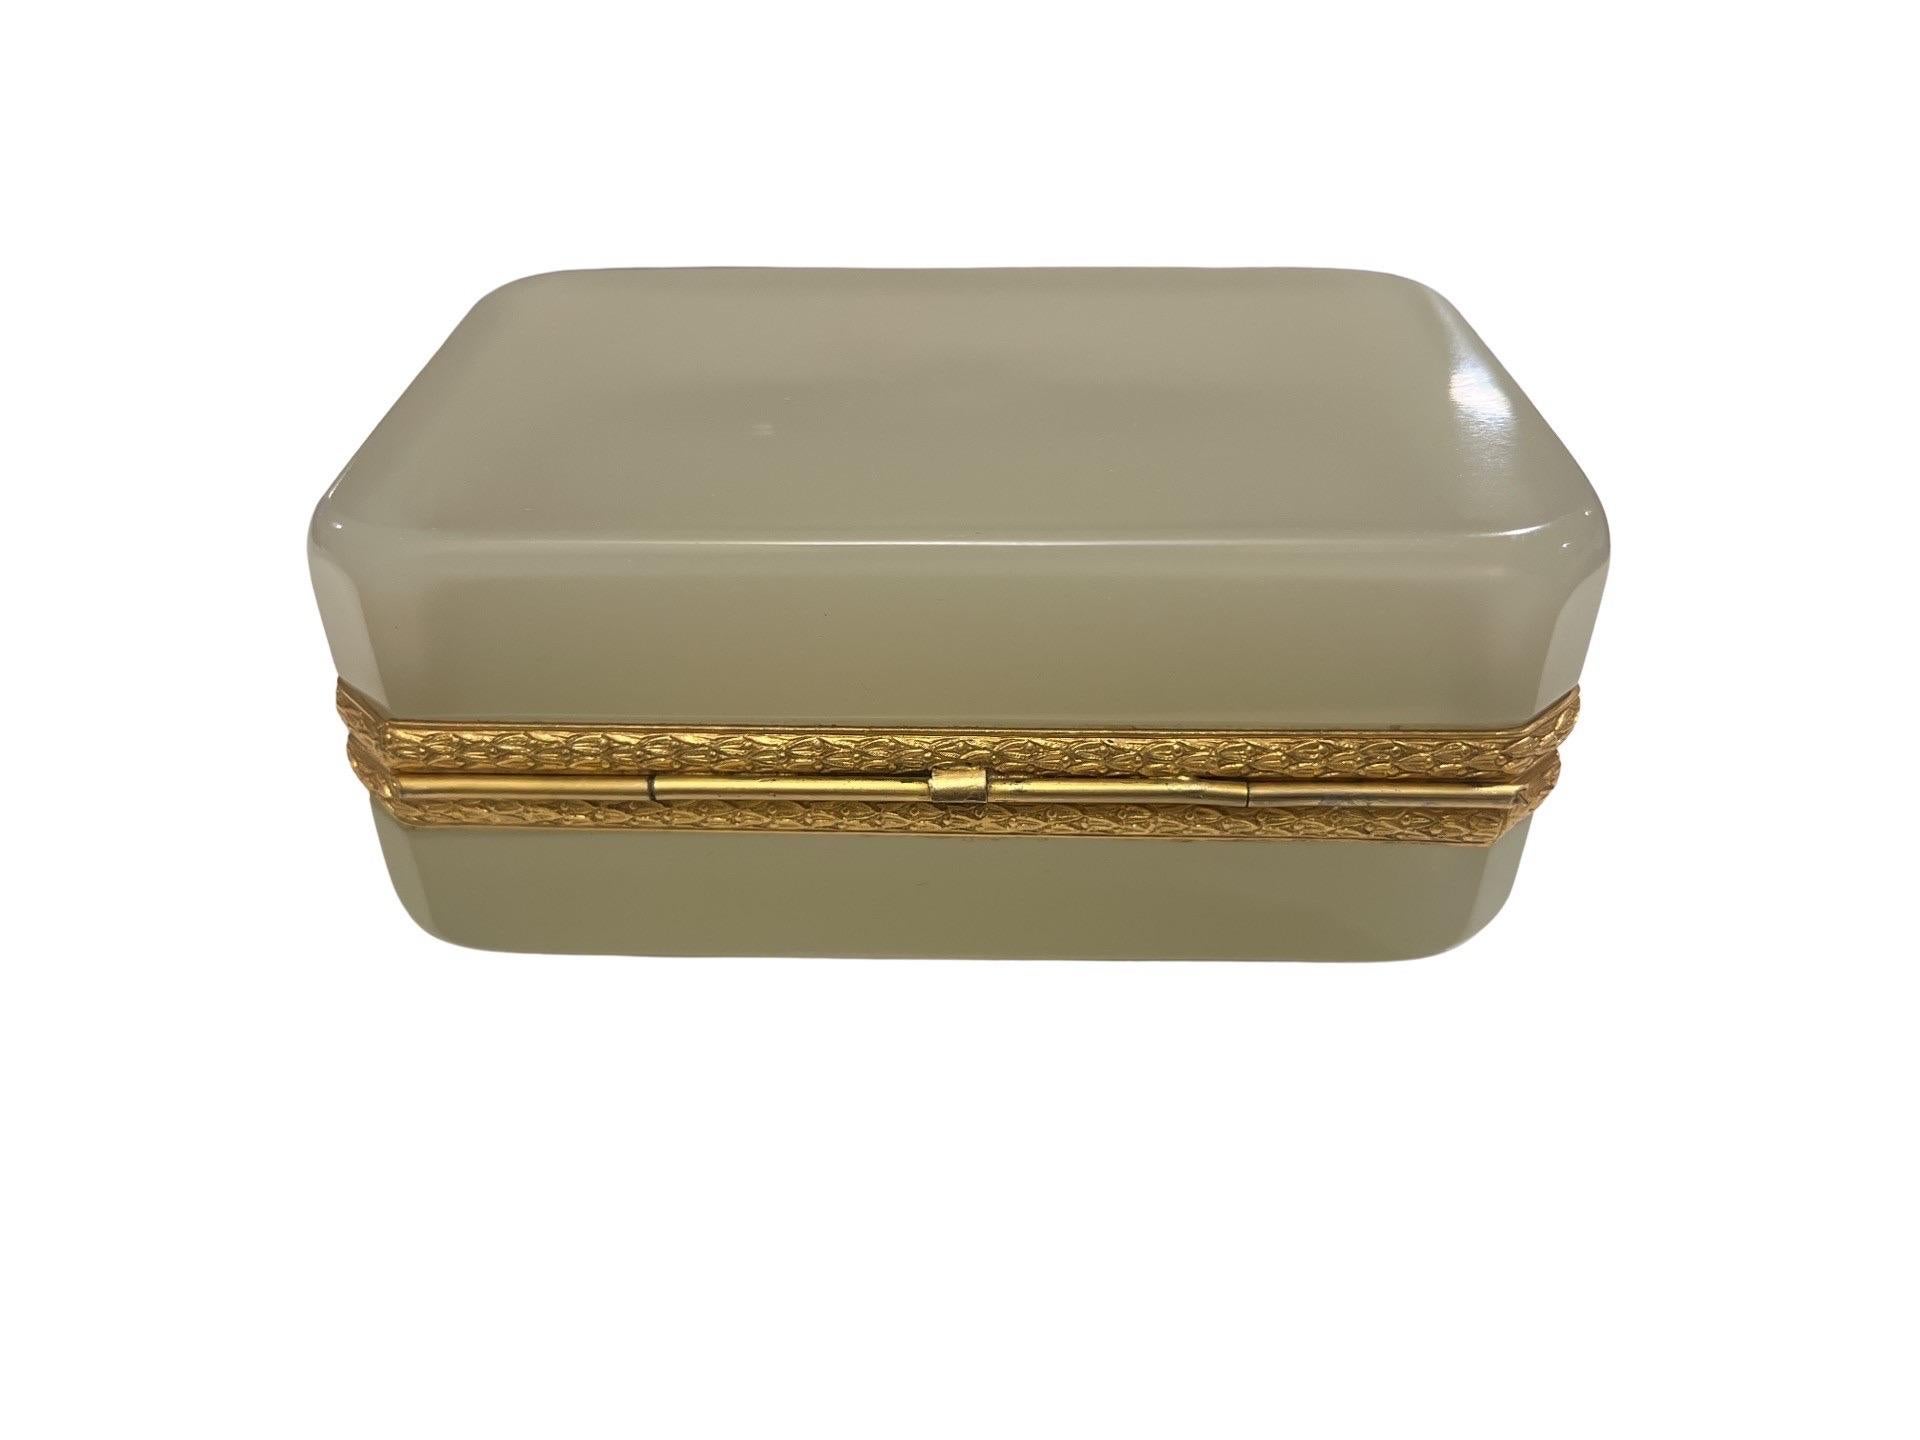 20th Century Antique French Opaline Glass Casket Having a Hinged Doré Bronze Band